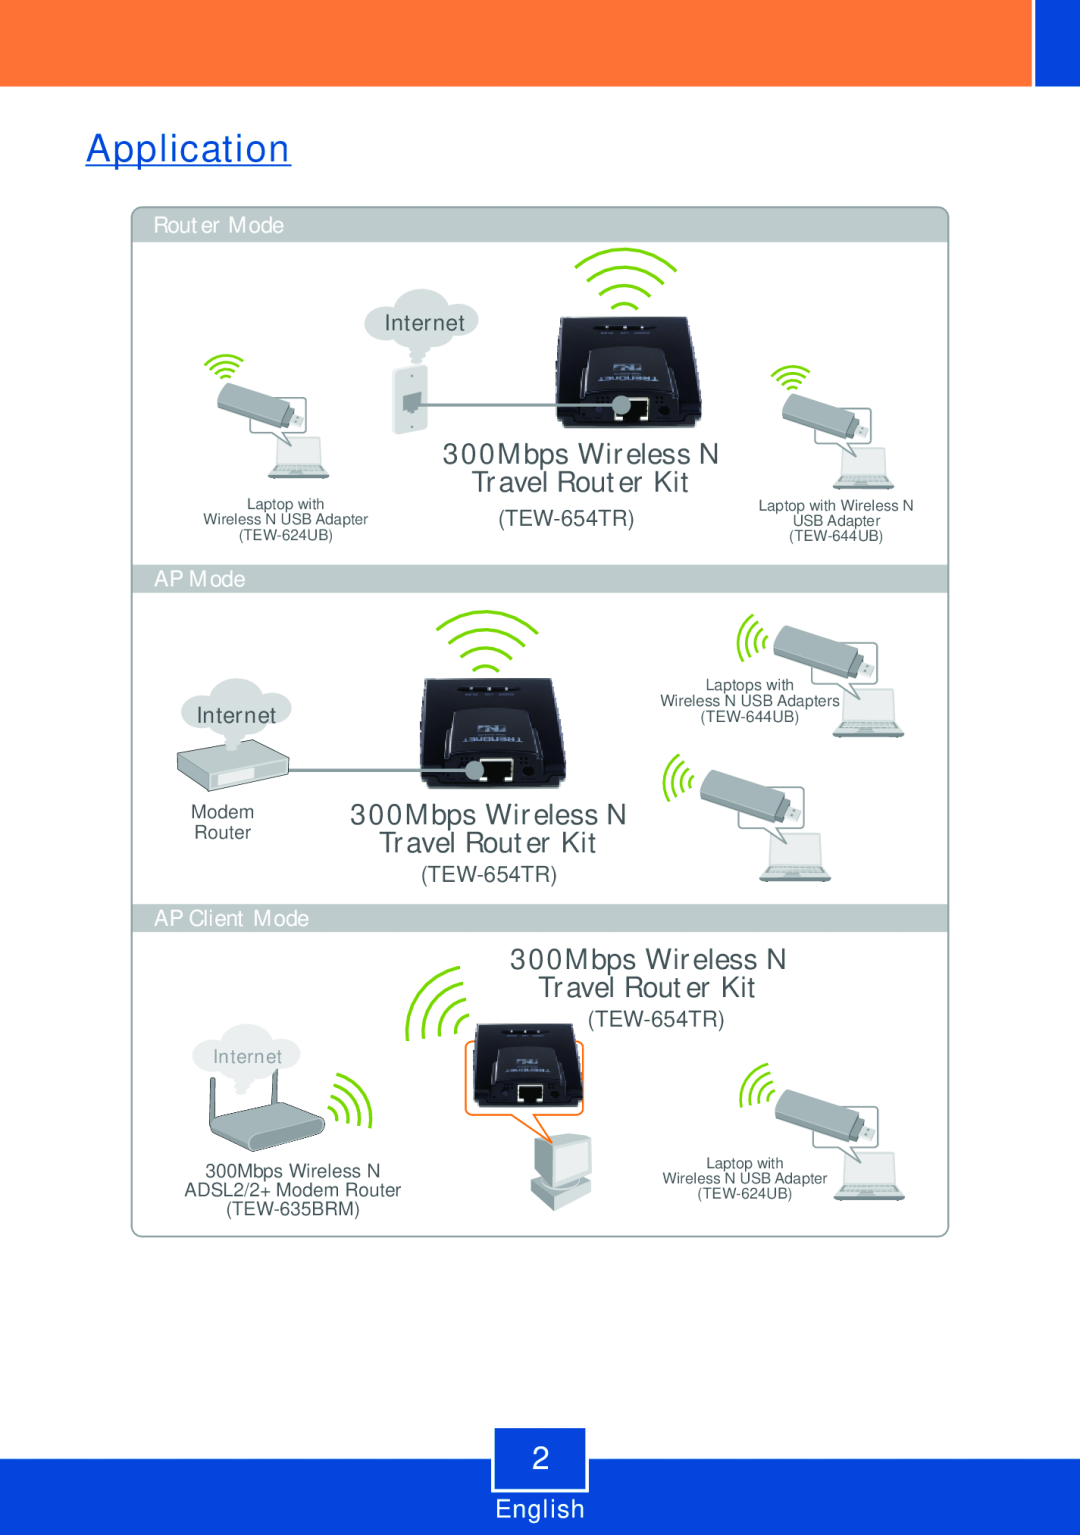 TRENDnet TEW-654TR manual Application, 300Mbps Wireless N Travel Router Kit, English, Router Mode, Internet, AP Mode, Modem 